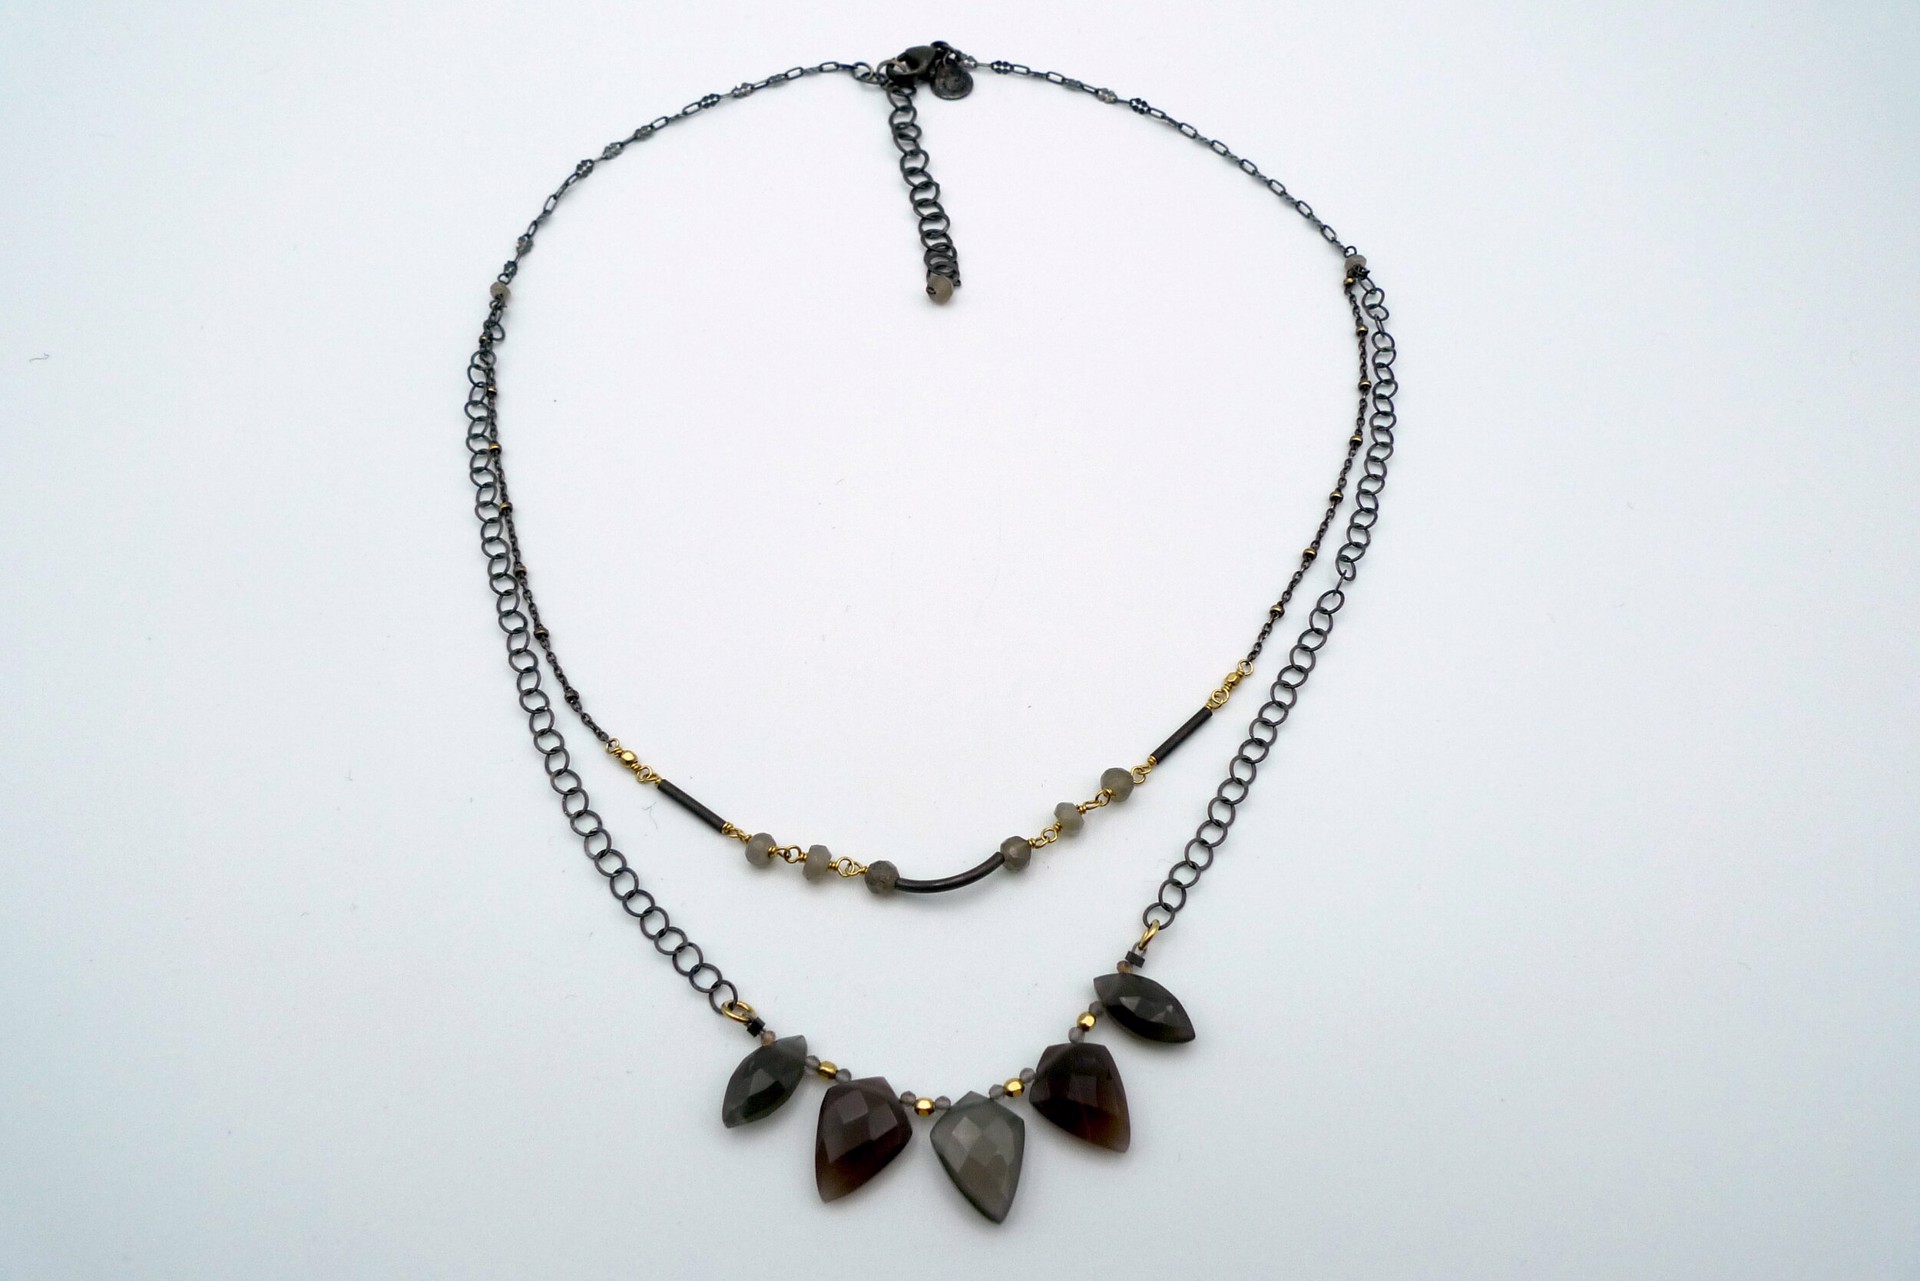 Moonstone Necklace by Alena Fisse-Karr